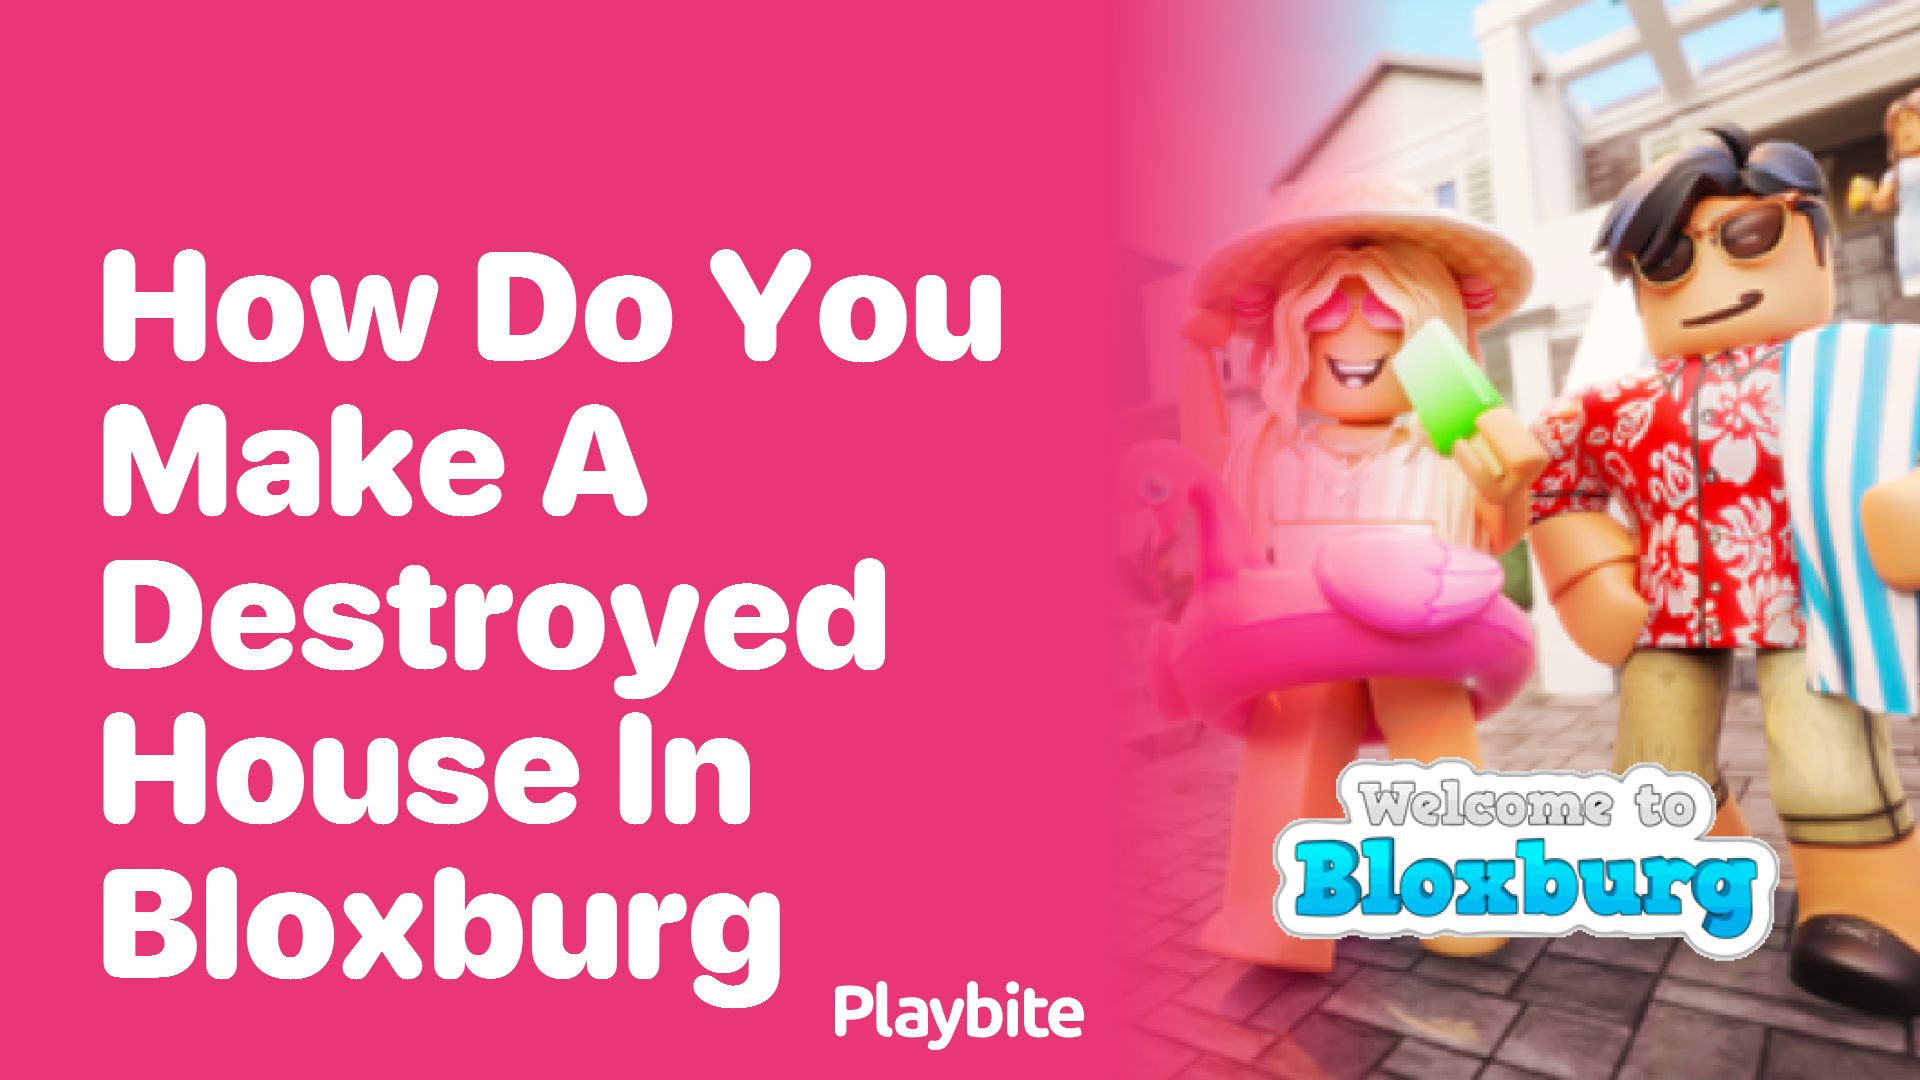 How Do You Make a Destroyed House in Bloxburg?